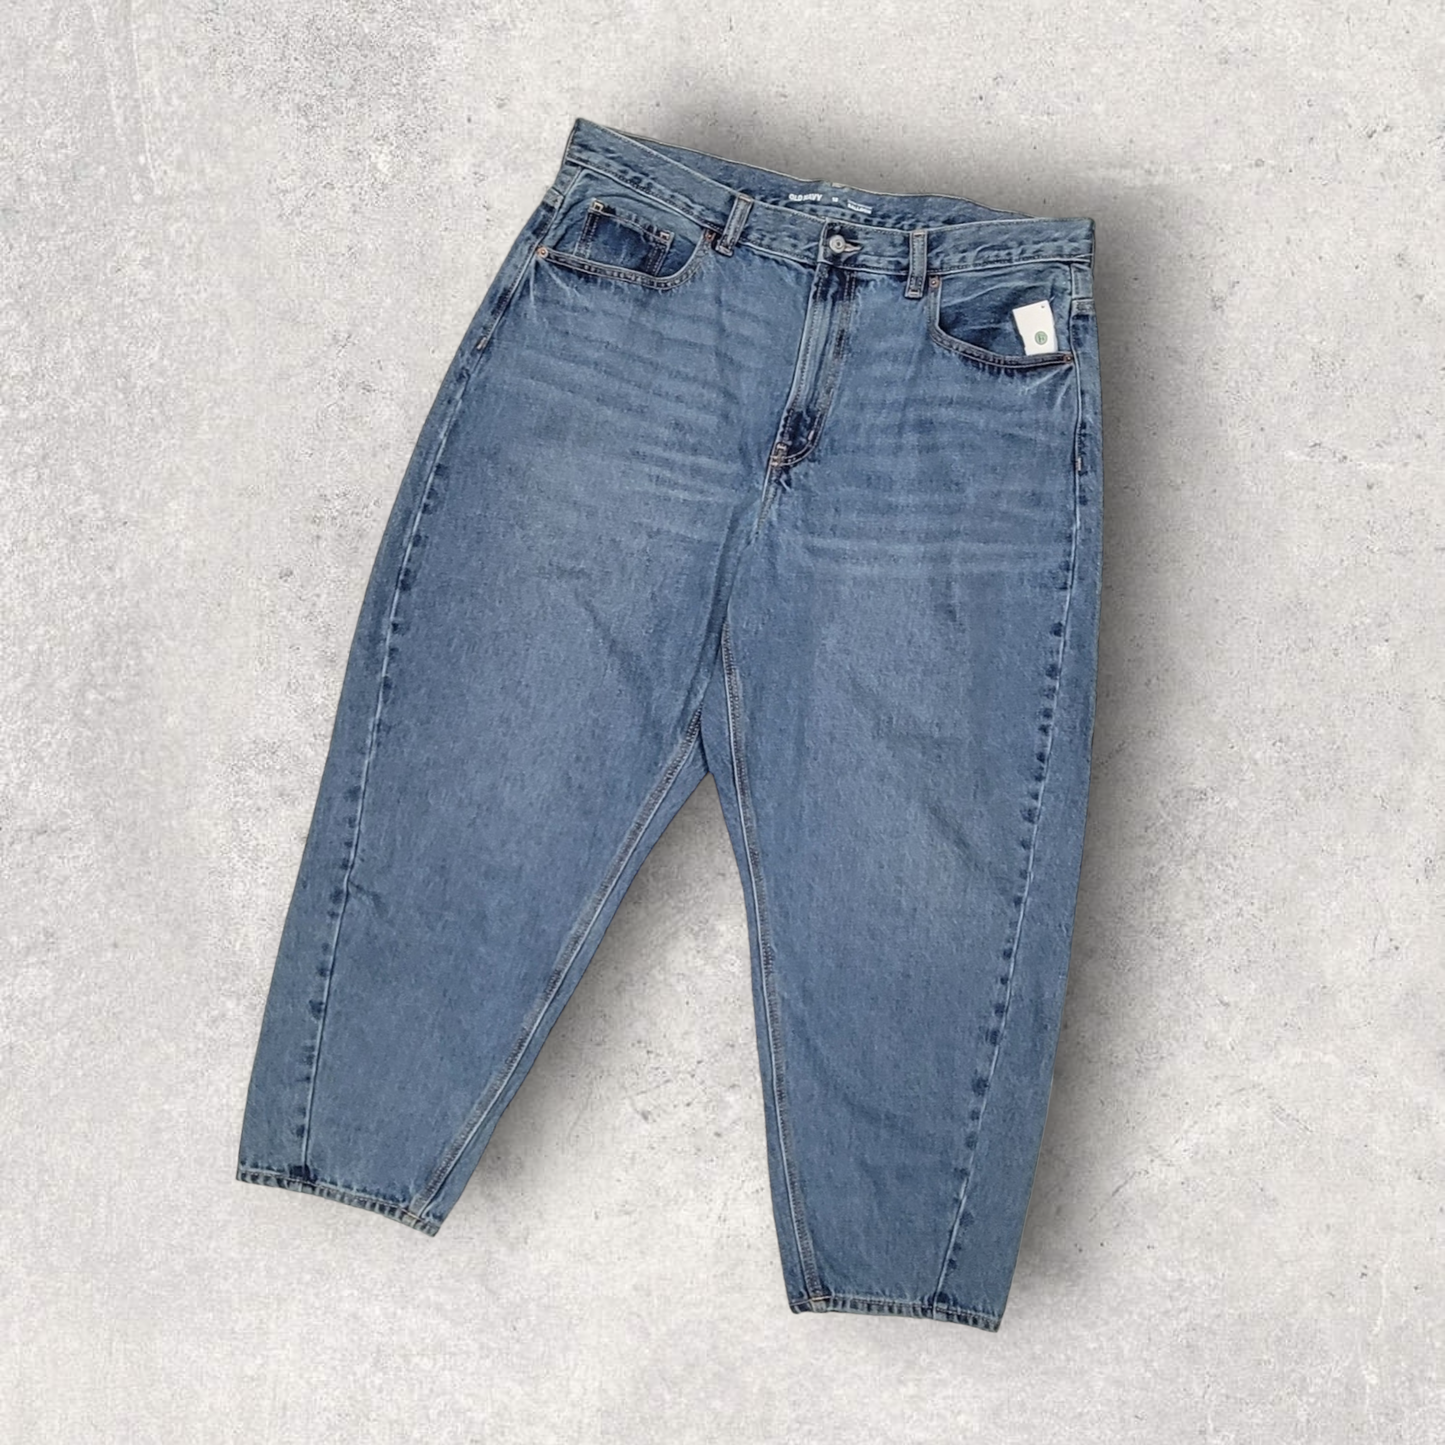 Jeans Relaxed/boyfriend By Old Navy  Size: 18